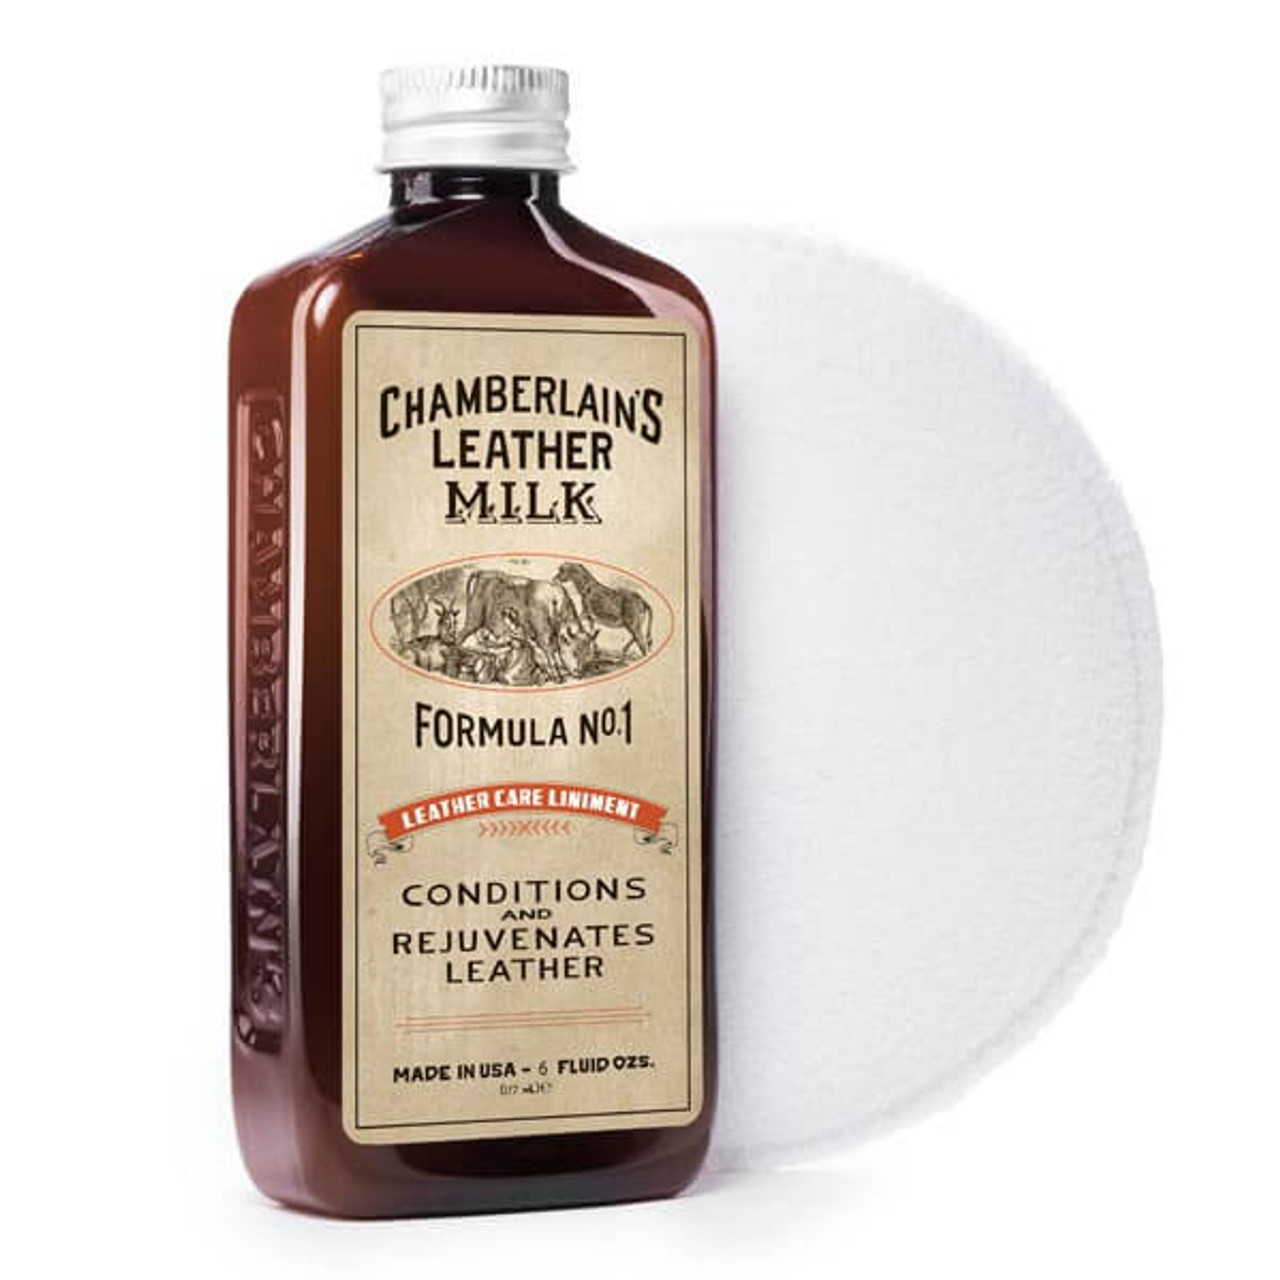 Chamberlain’s Leather Milk - Leather Care Liniment